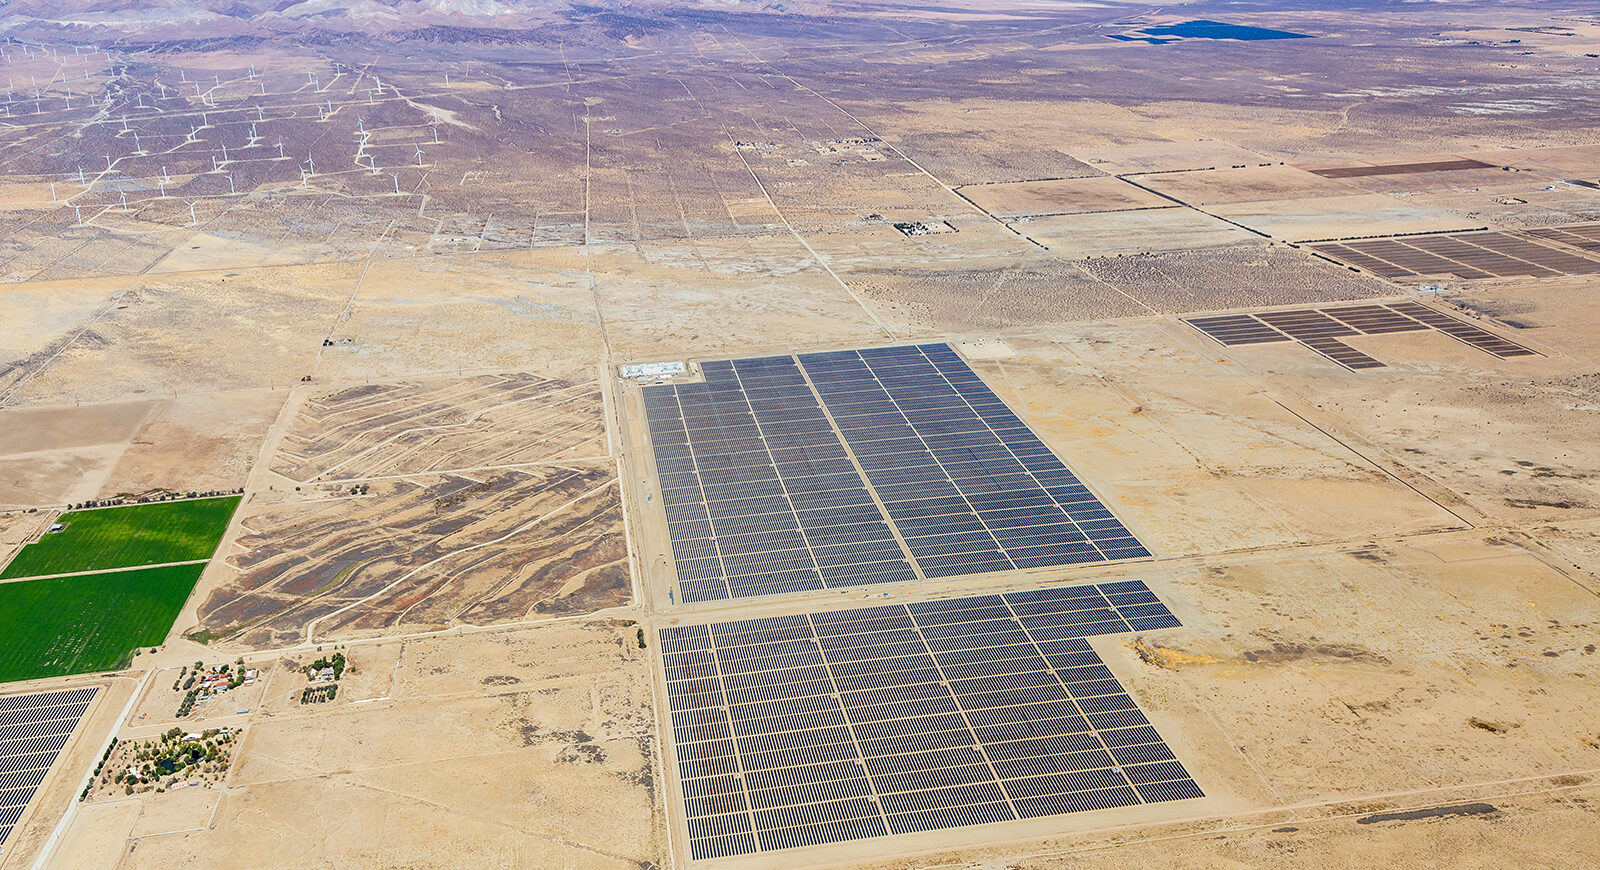 Aerial view of solar panels on the plain